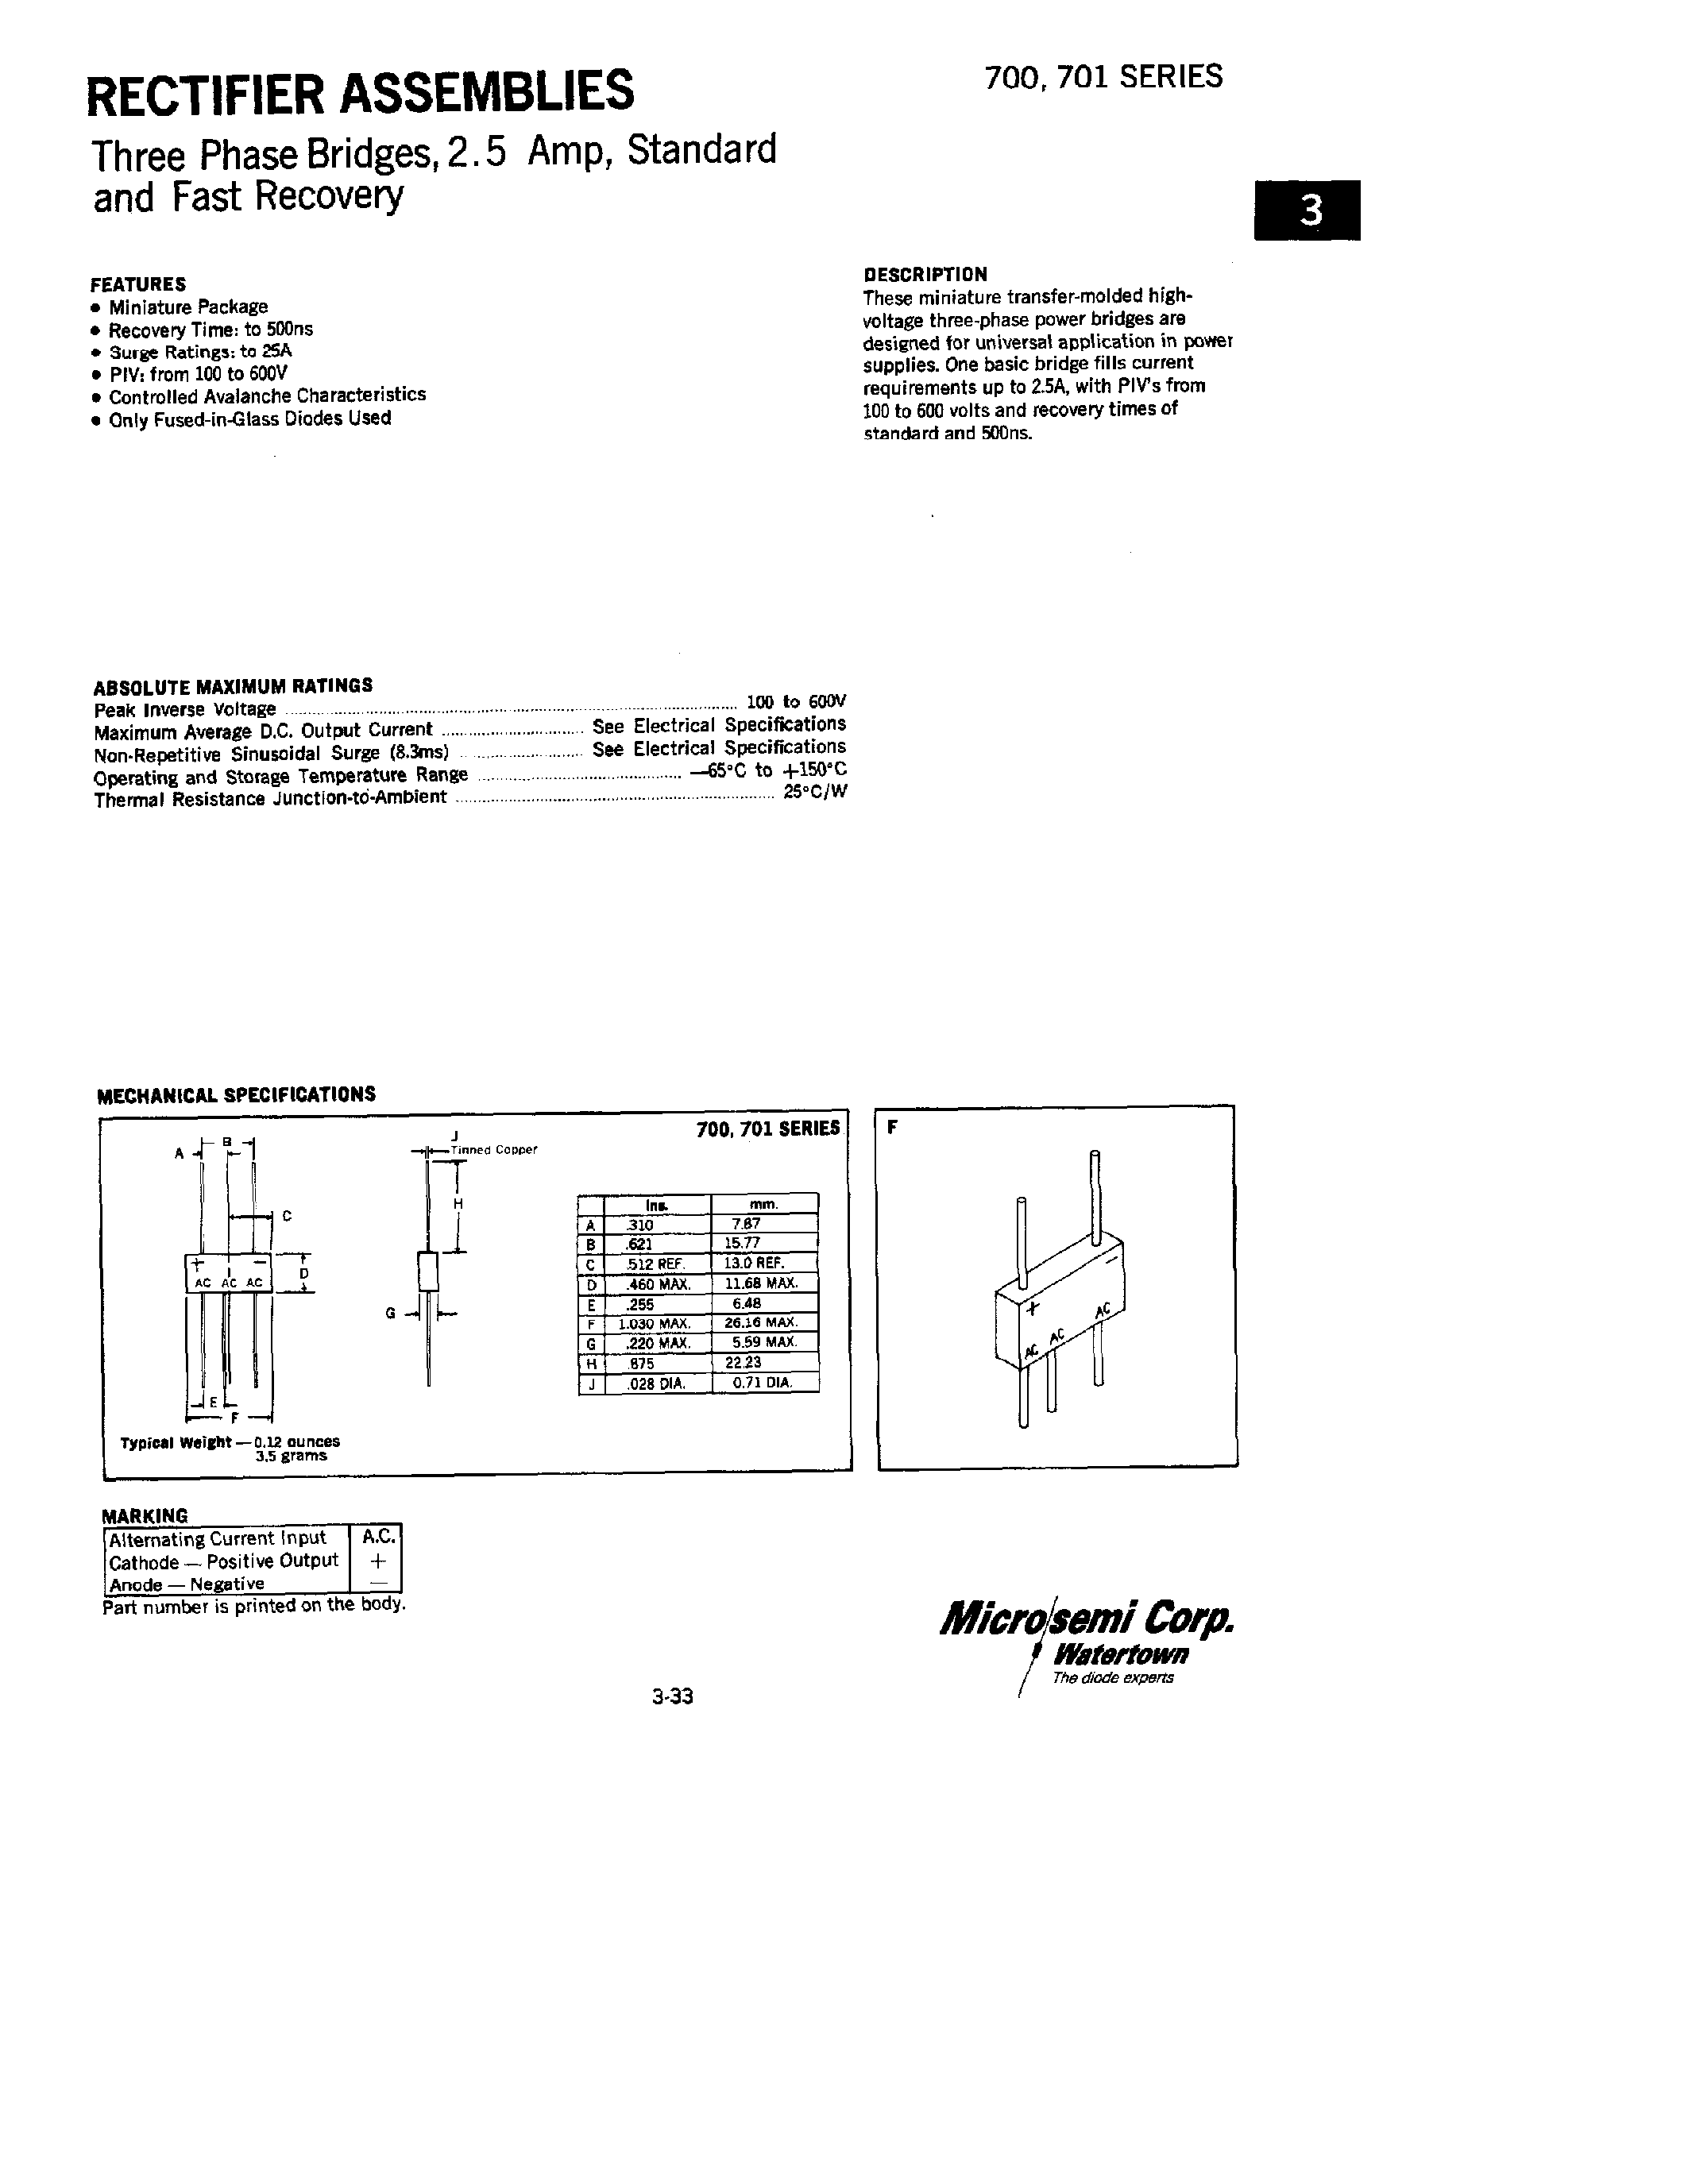 Datasheet 700-5 - RECTIFIERS ASSEMBLIES THREE PHASE BRIDGES/ 2.5 AMP/ STANDARD AND FAST RECOVERY page 1